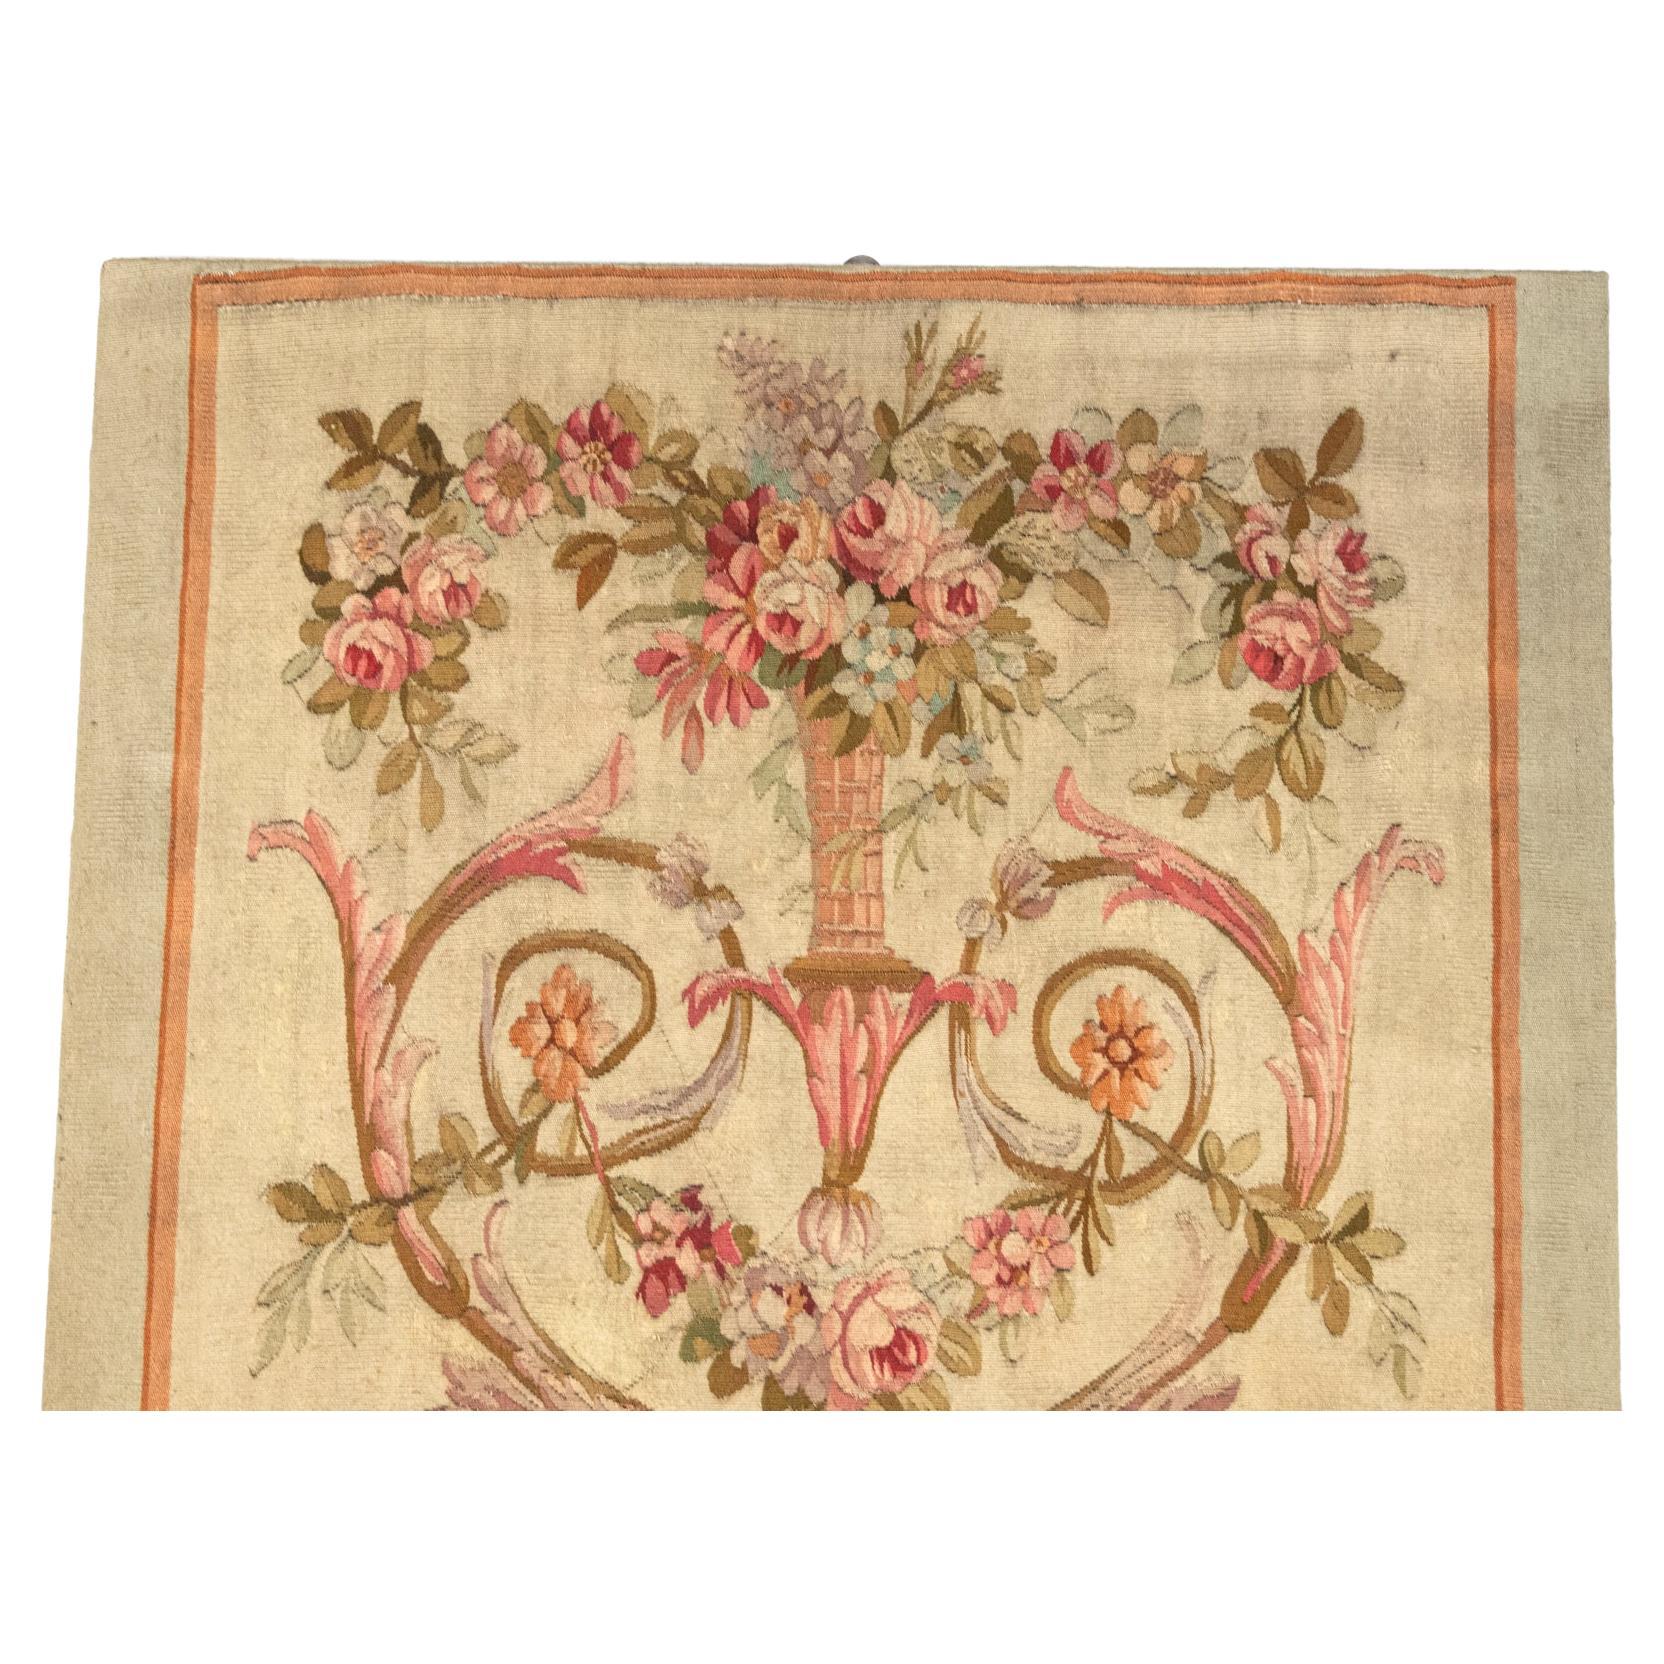 nr. 688 - An interesting antique French Aubusson tapestry, with non-binding sizes, therefore easy to fit into a modern home: perhaps a sliding door (why not ?).  Colors pleasant, easily adaptable.
To facilitate SHIPPING it can be removed from the